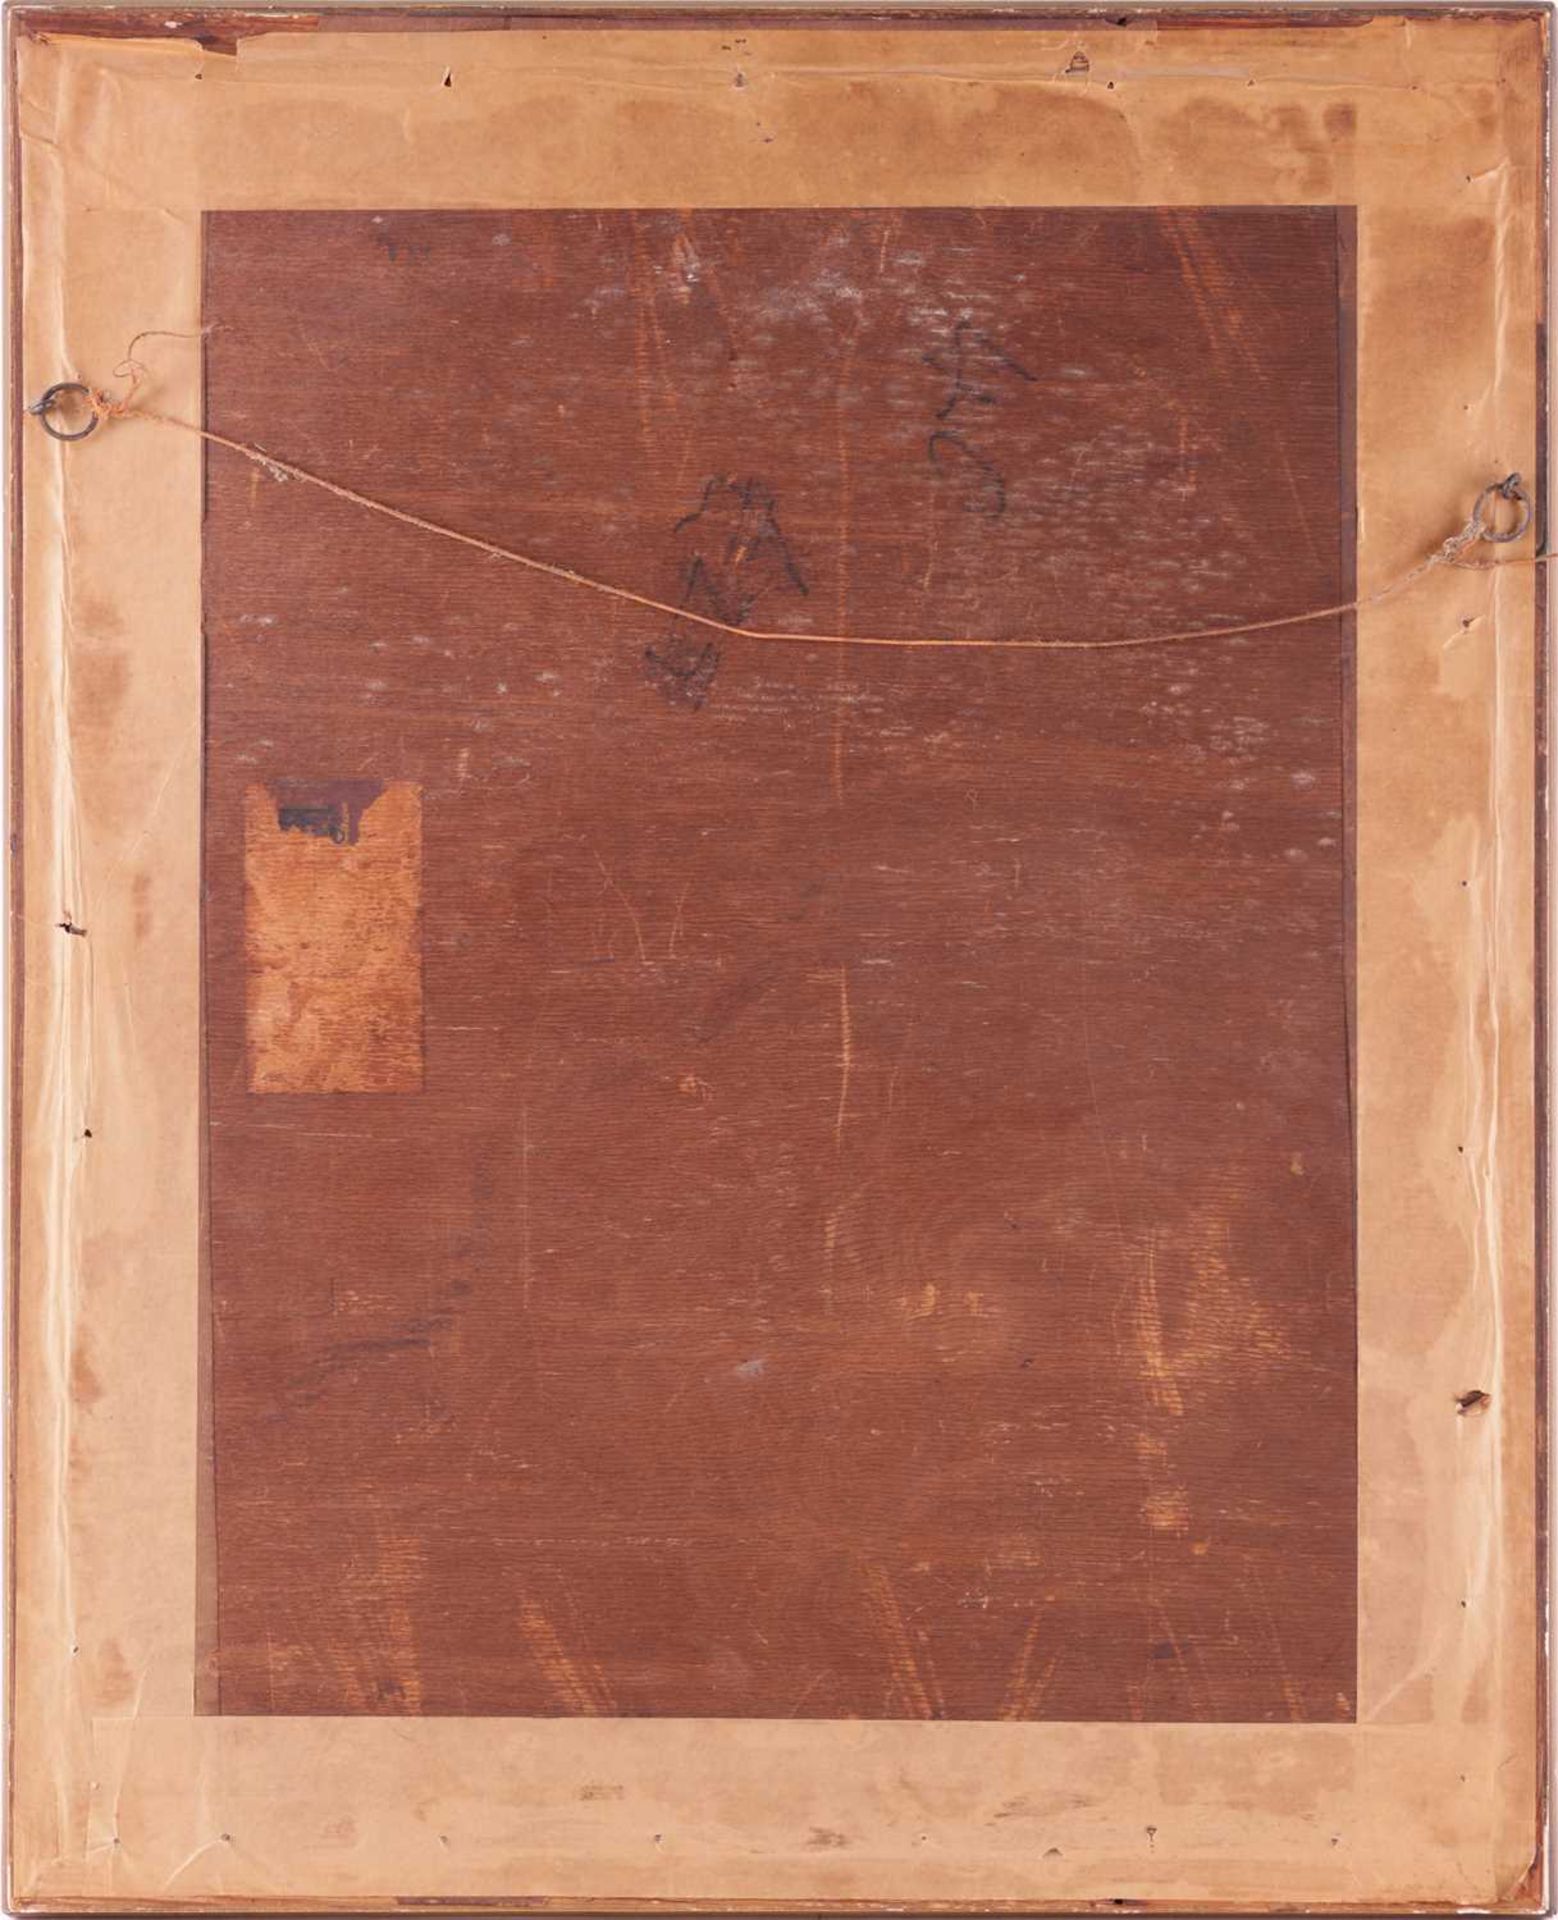 John Kingerlee (b. 1936), Untitled Abstract, signed 'Kingerlee' and possibly dated '67 (lower right) - Image 8 of 8